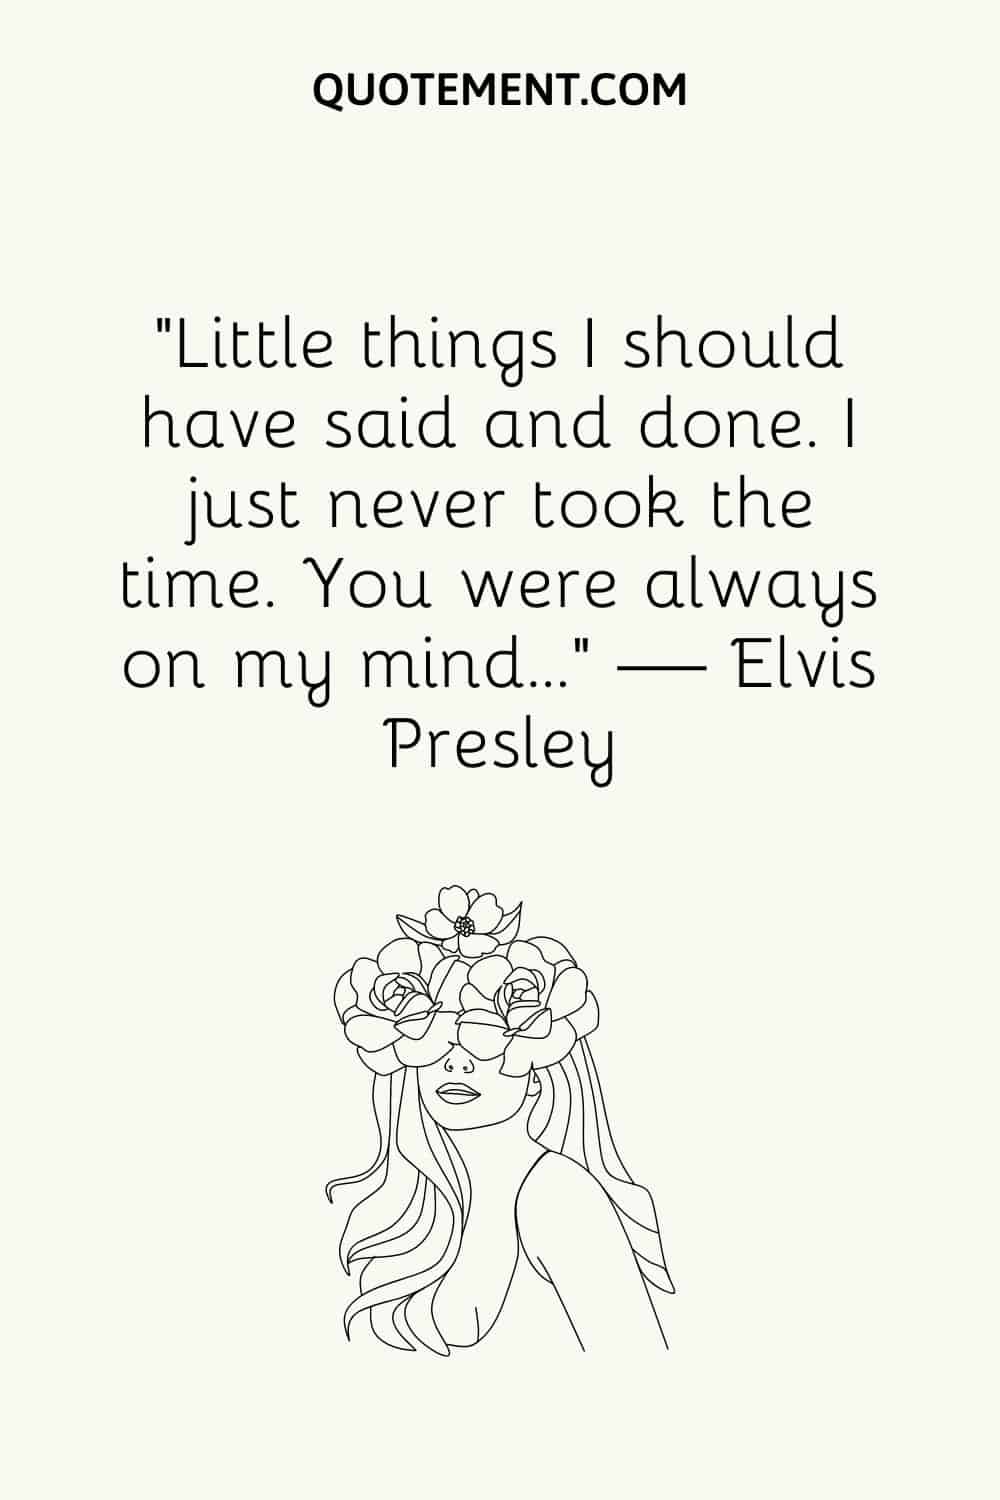 “Little things I should have said and done. I just never took the time. You were always on my mind…” — Elvis Presley